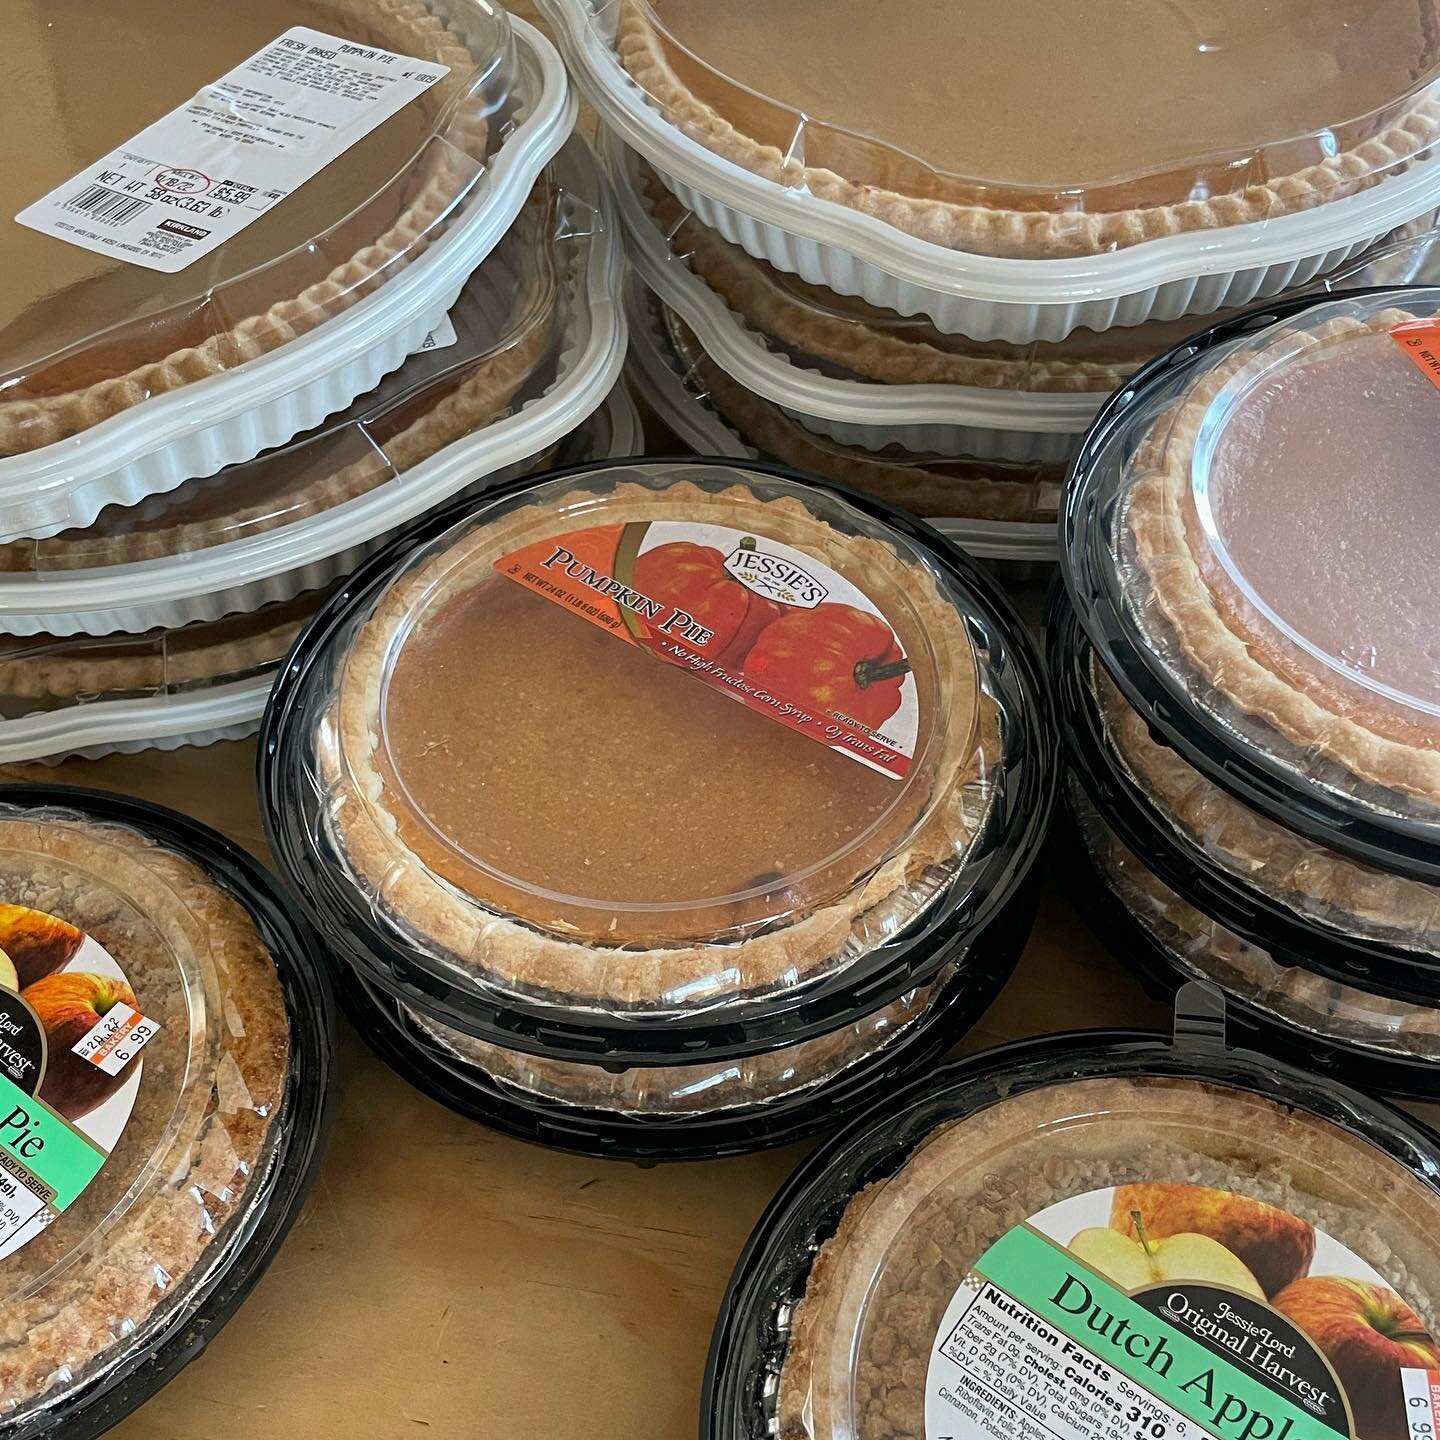 A huge thank you to our young adults at Lakewood High School for making big moves toward giving back and showing their gratitude by providing for others in need this Thanksgiving. They provided pies for 15 families to go with our Thanksgiving Bags. I